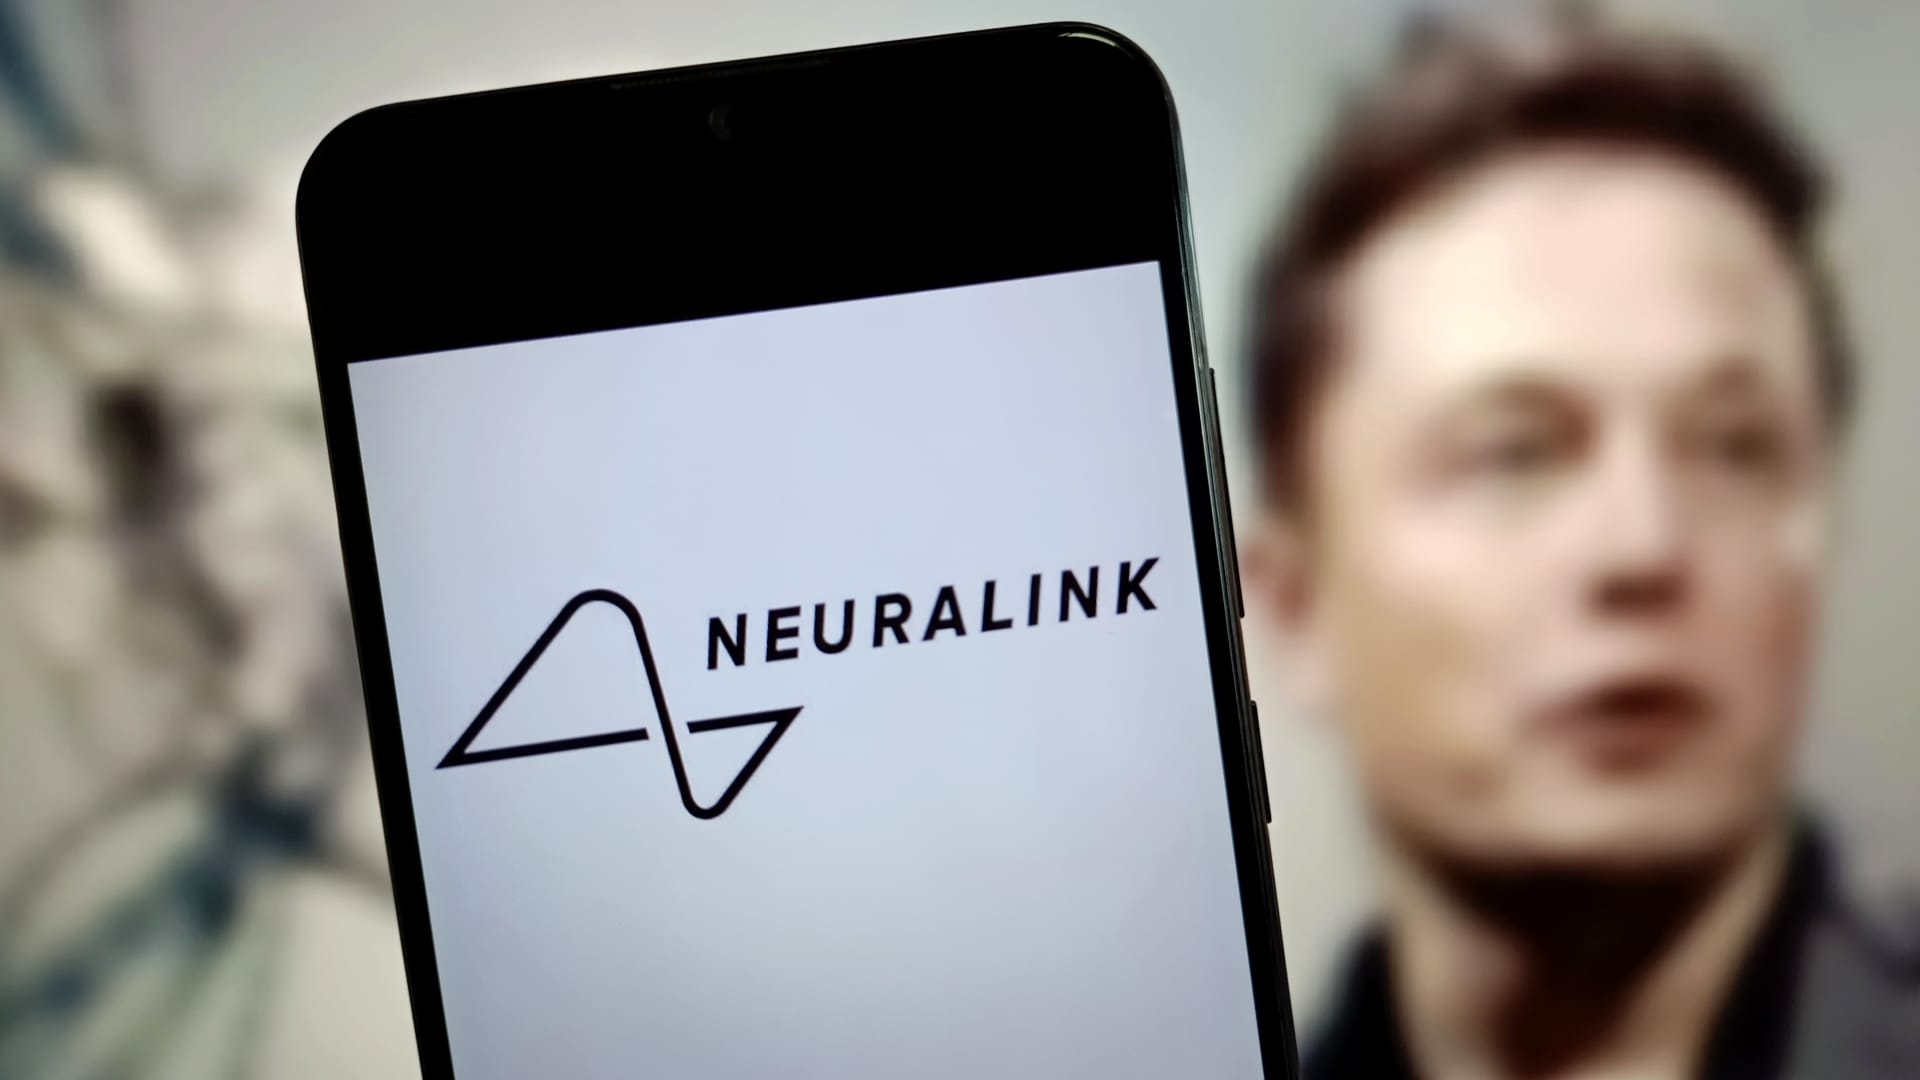 Elon Musk's Neuralink implants brain tech in human patient for the first time